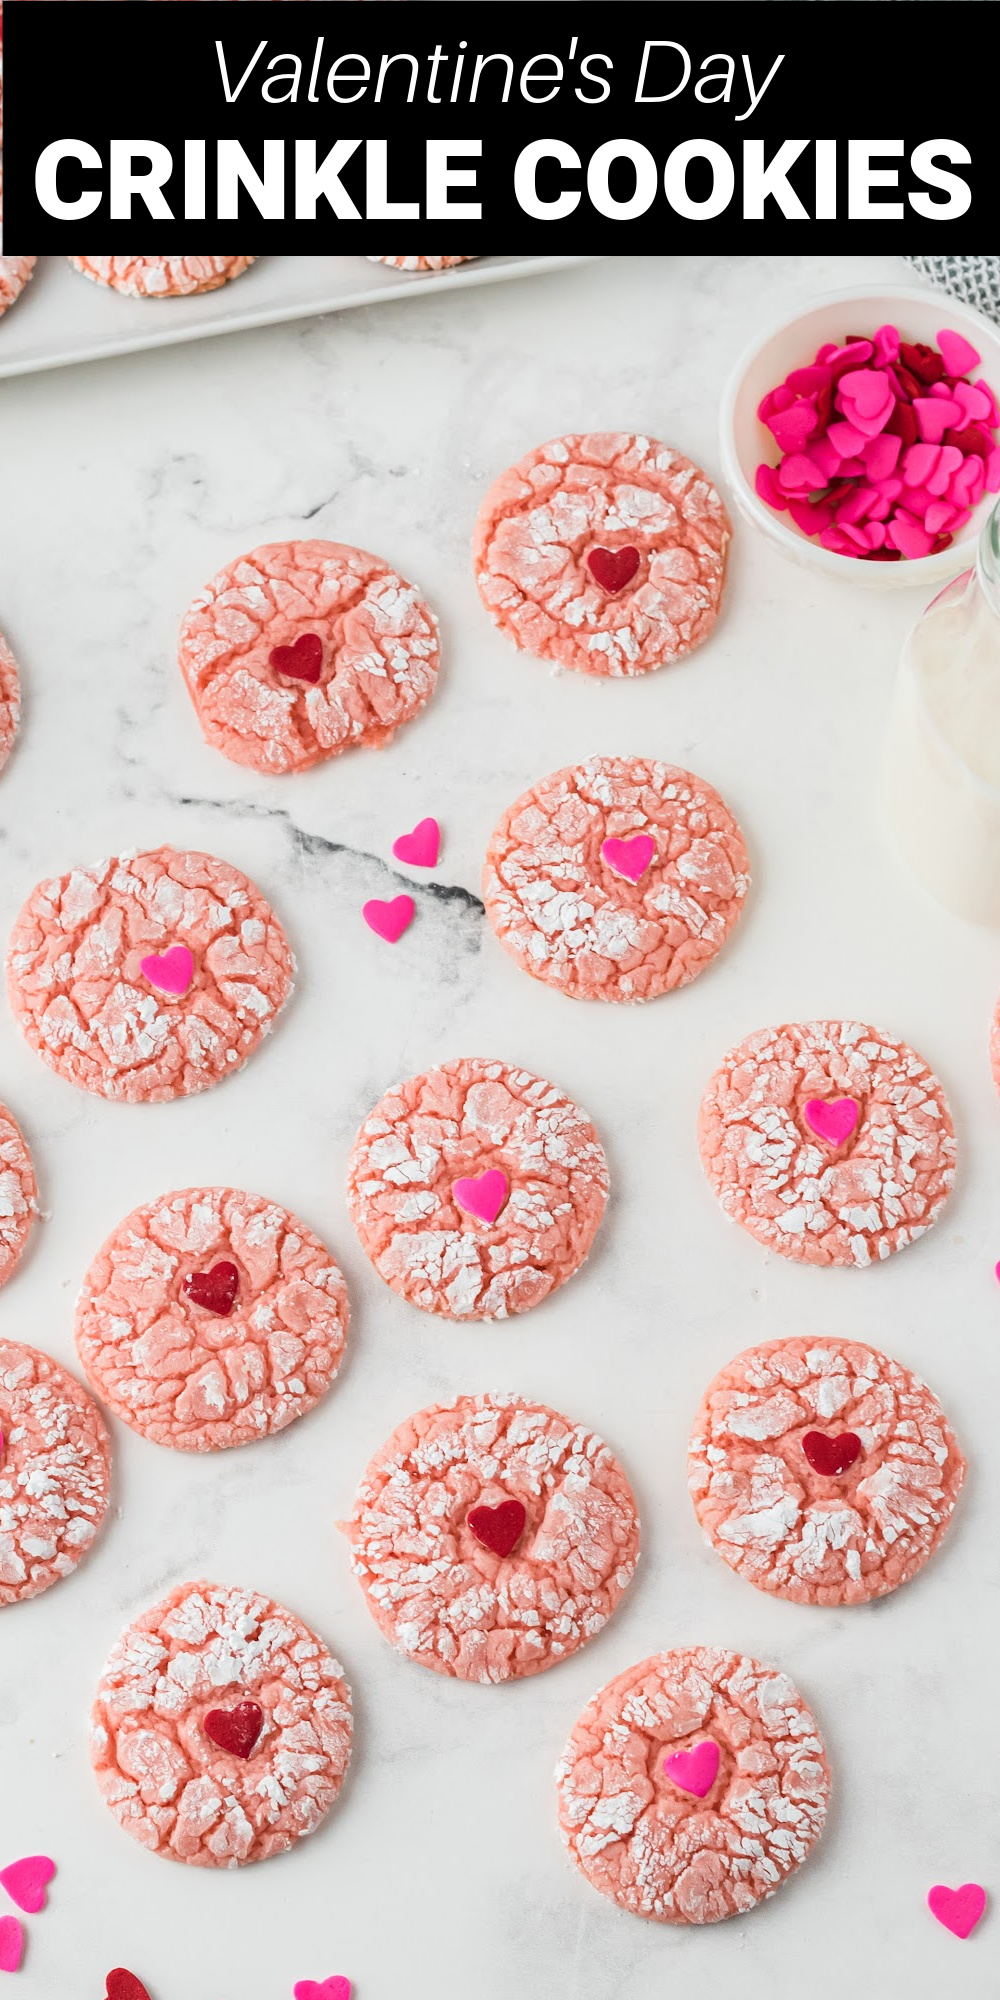 These Valentine's Crinkle Cookies are super easy to make and only takes a few simple ingredients. They have the most beautiful pink shade and pillowy soft texture that will make them perfect Valentine's Day cookies.